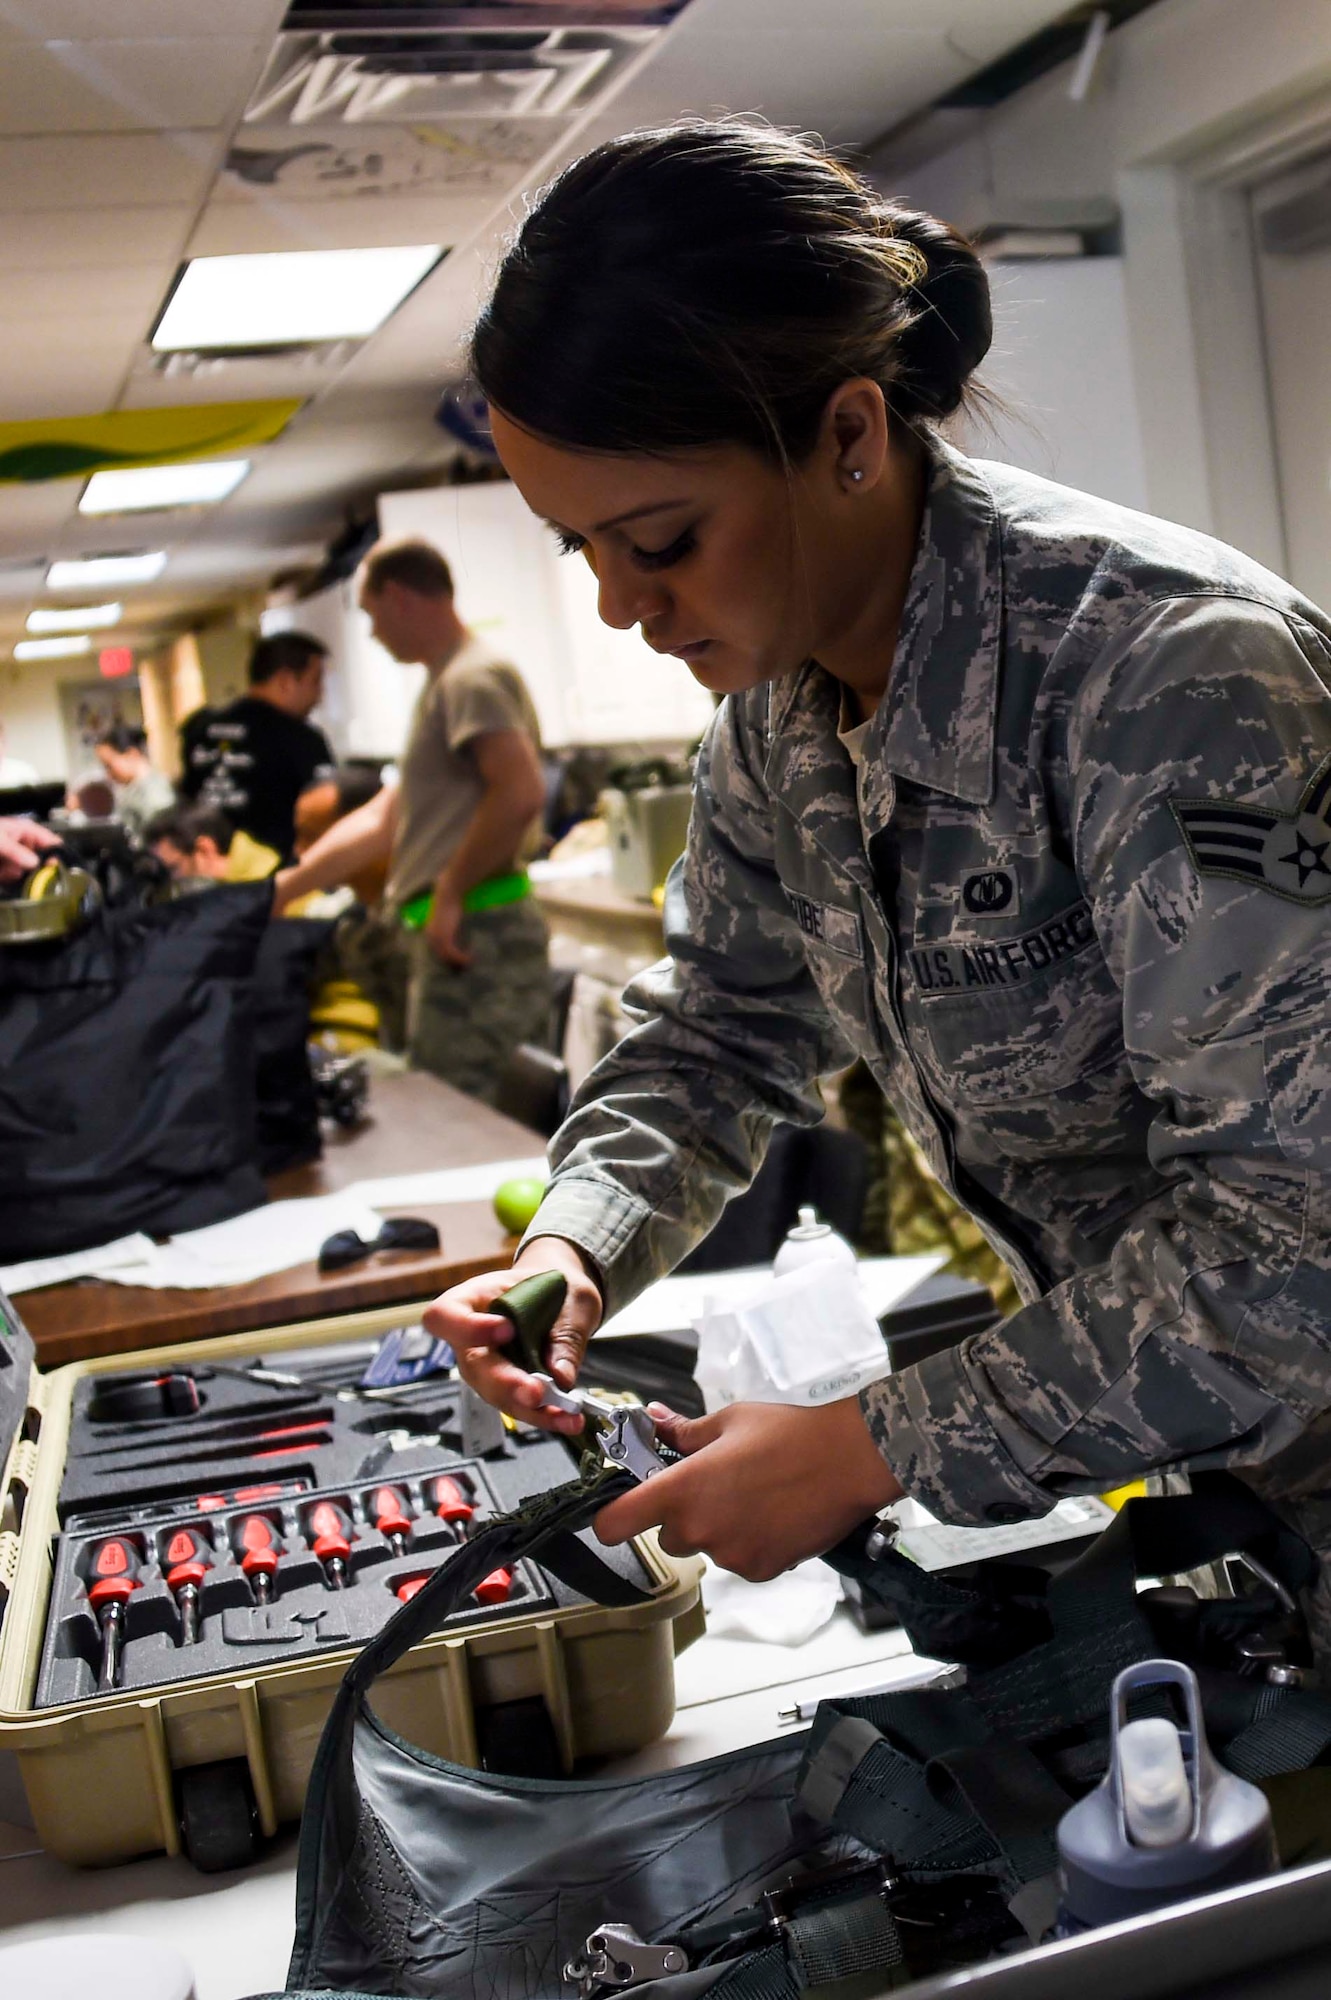 U.S. Air Force Senior Airman Alyssa Uribe, 144th Operations Group aircrew flight equipment technician, conducts a routine inspection on a harness as part of Red Flag 16-1 held at Nellis Air Force Base, Nev. Feb. 3, 2016. Uribe and the rest of the 144th OG AFE team complete thorough inspections on all the 194th Fighter Squadron pilots’ flight equipment before every mission to ensure the safest flight every time. (U.S. Air National Guard photo by Senior Airman Klynne Pearl Serrano)